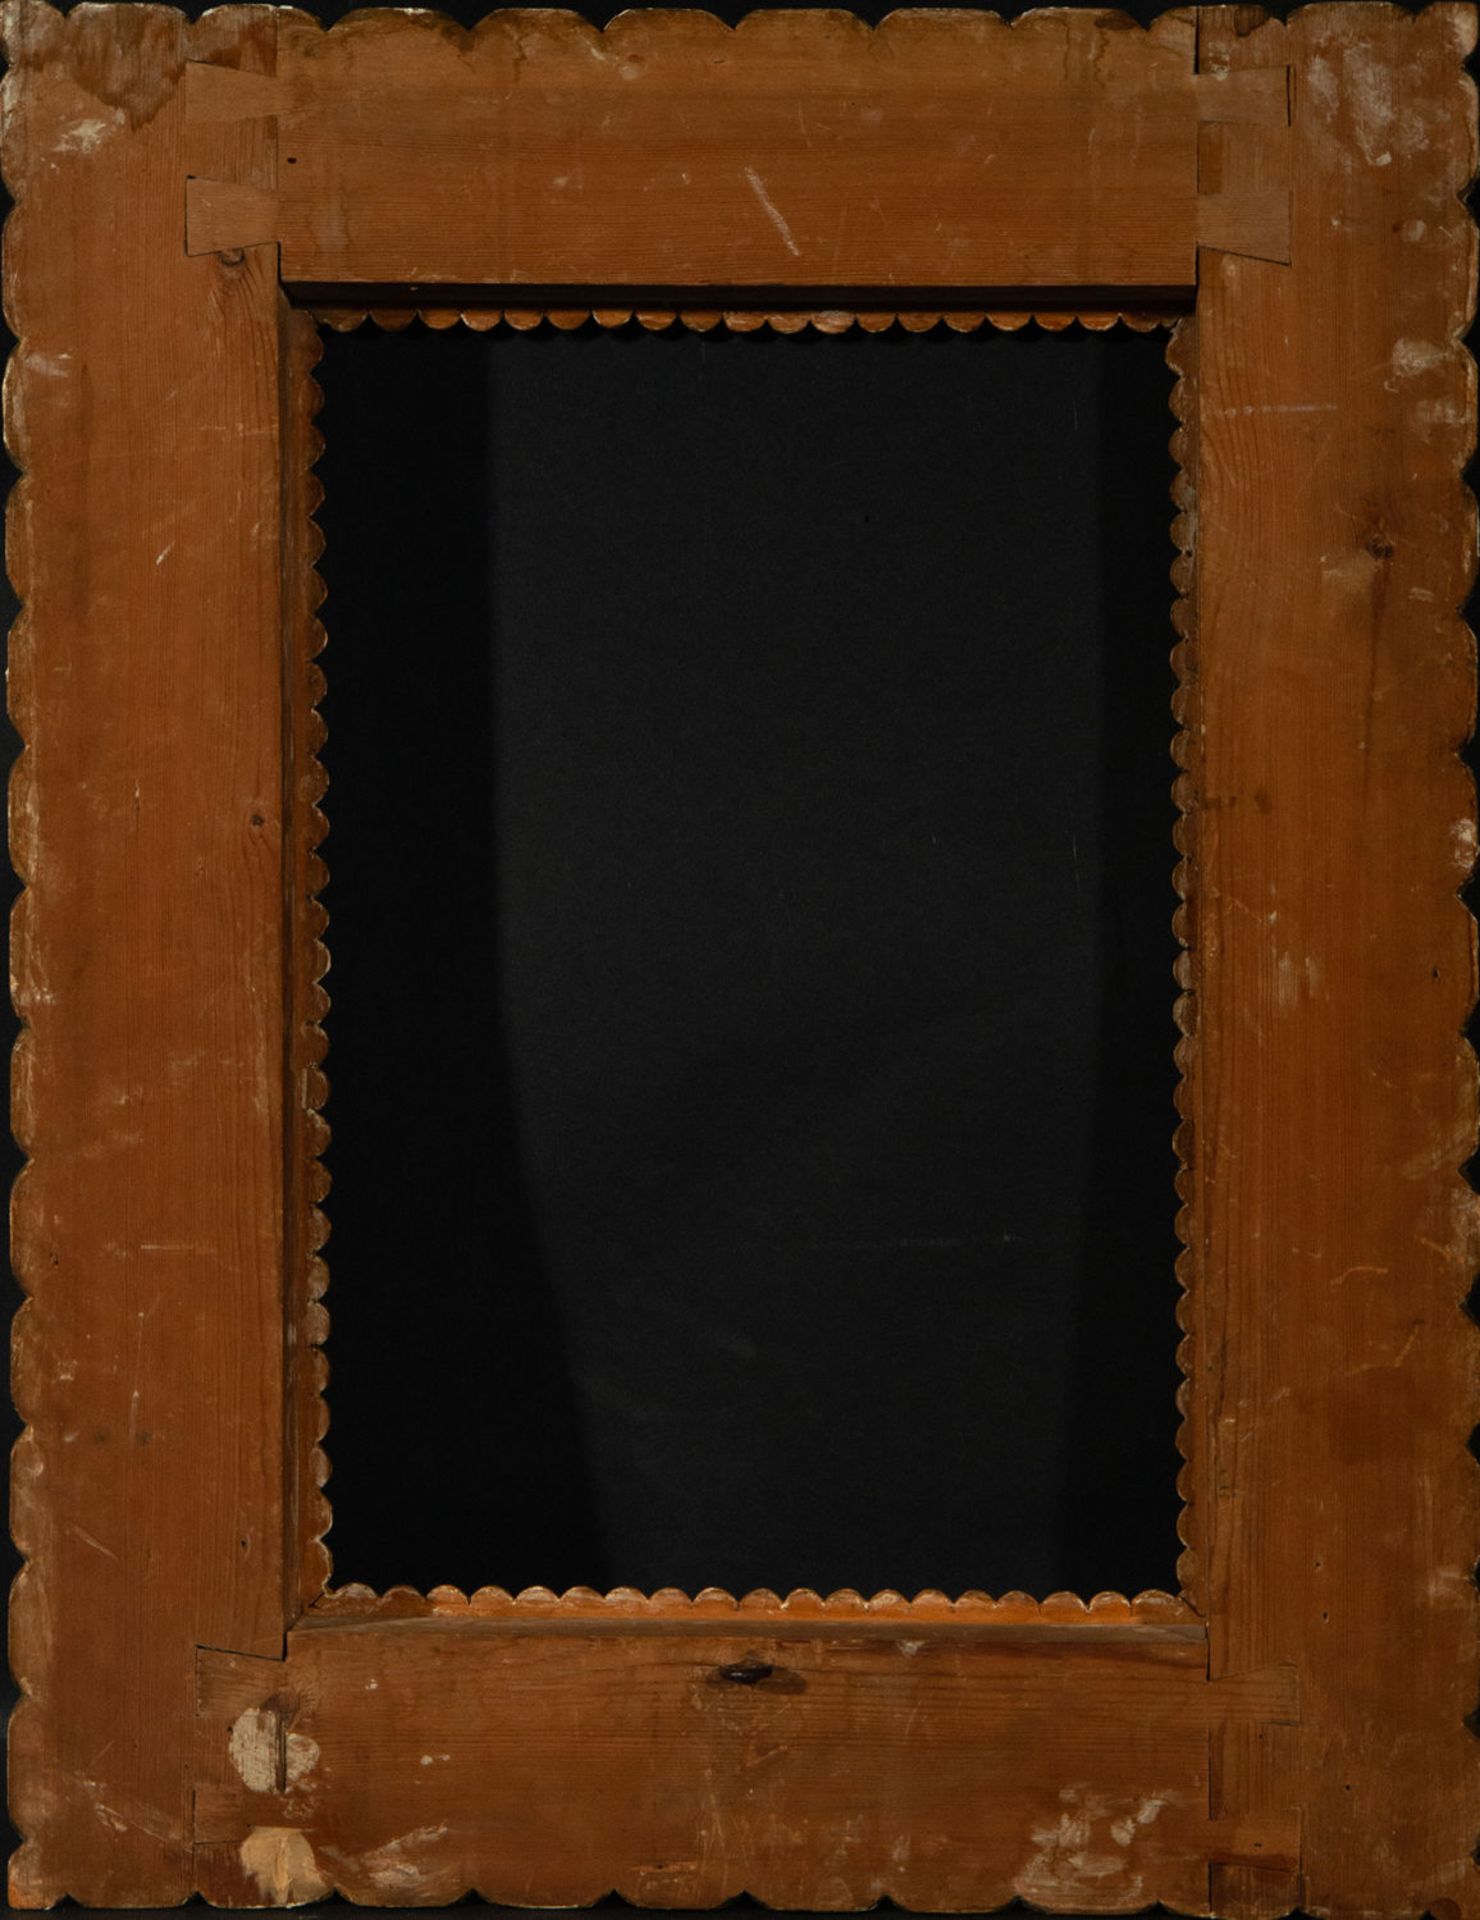 Baroque style frame in gilded wood, 19th century - Image 3 of 4